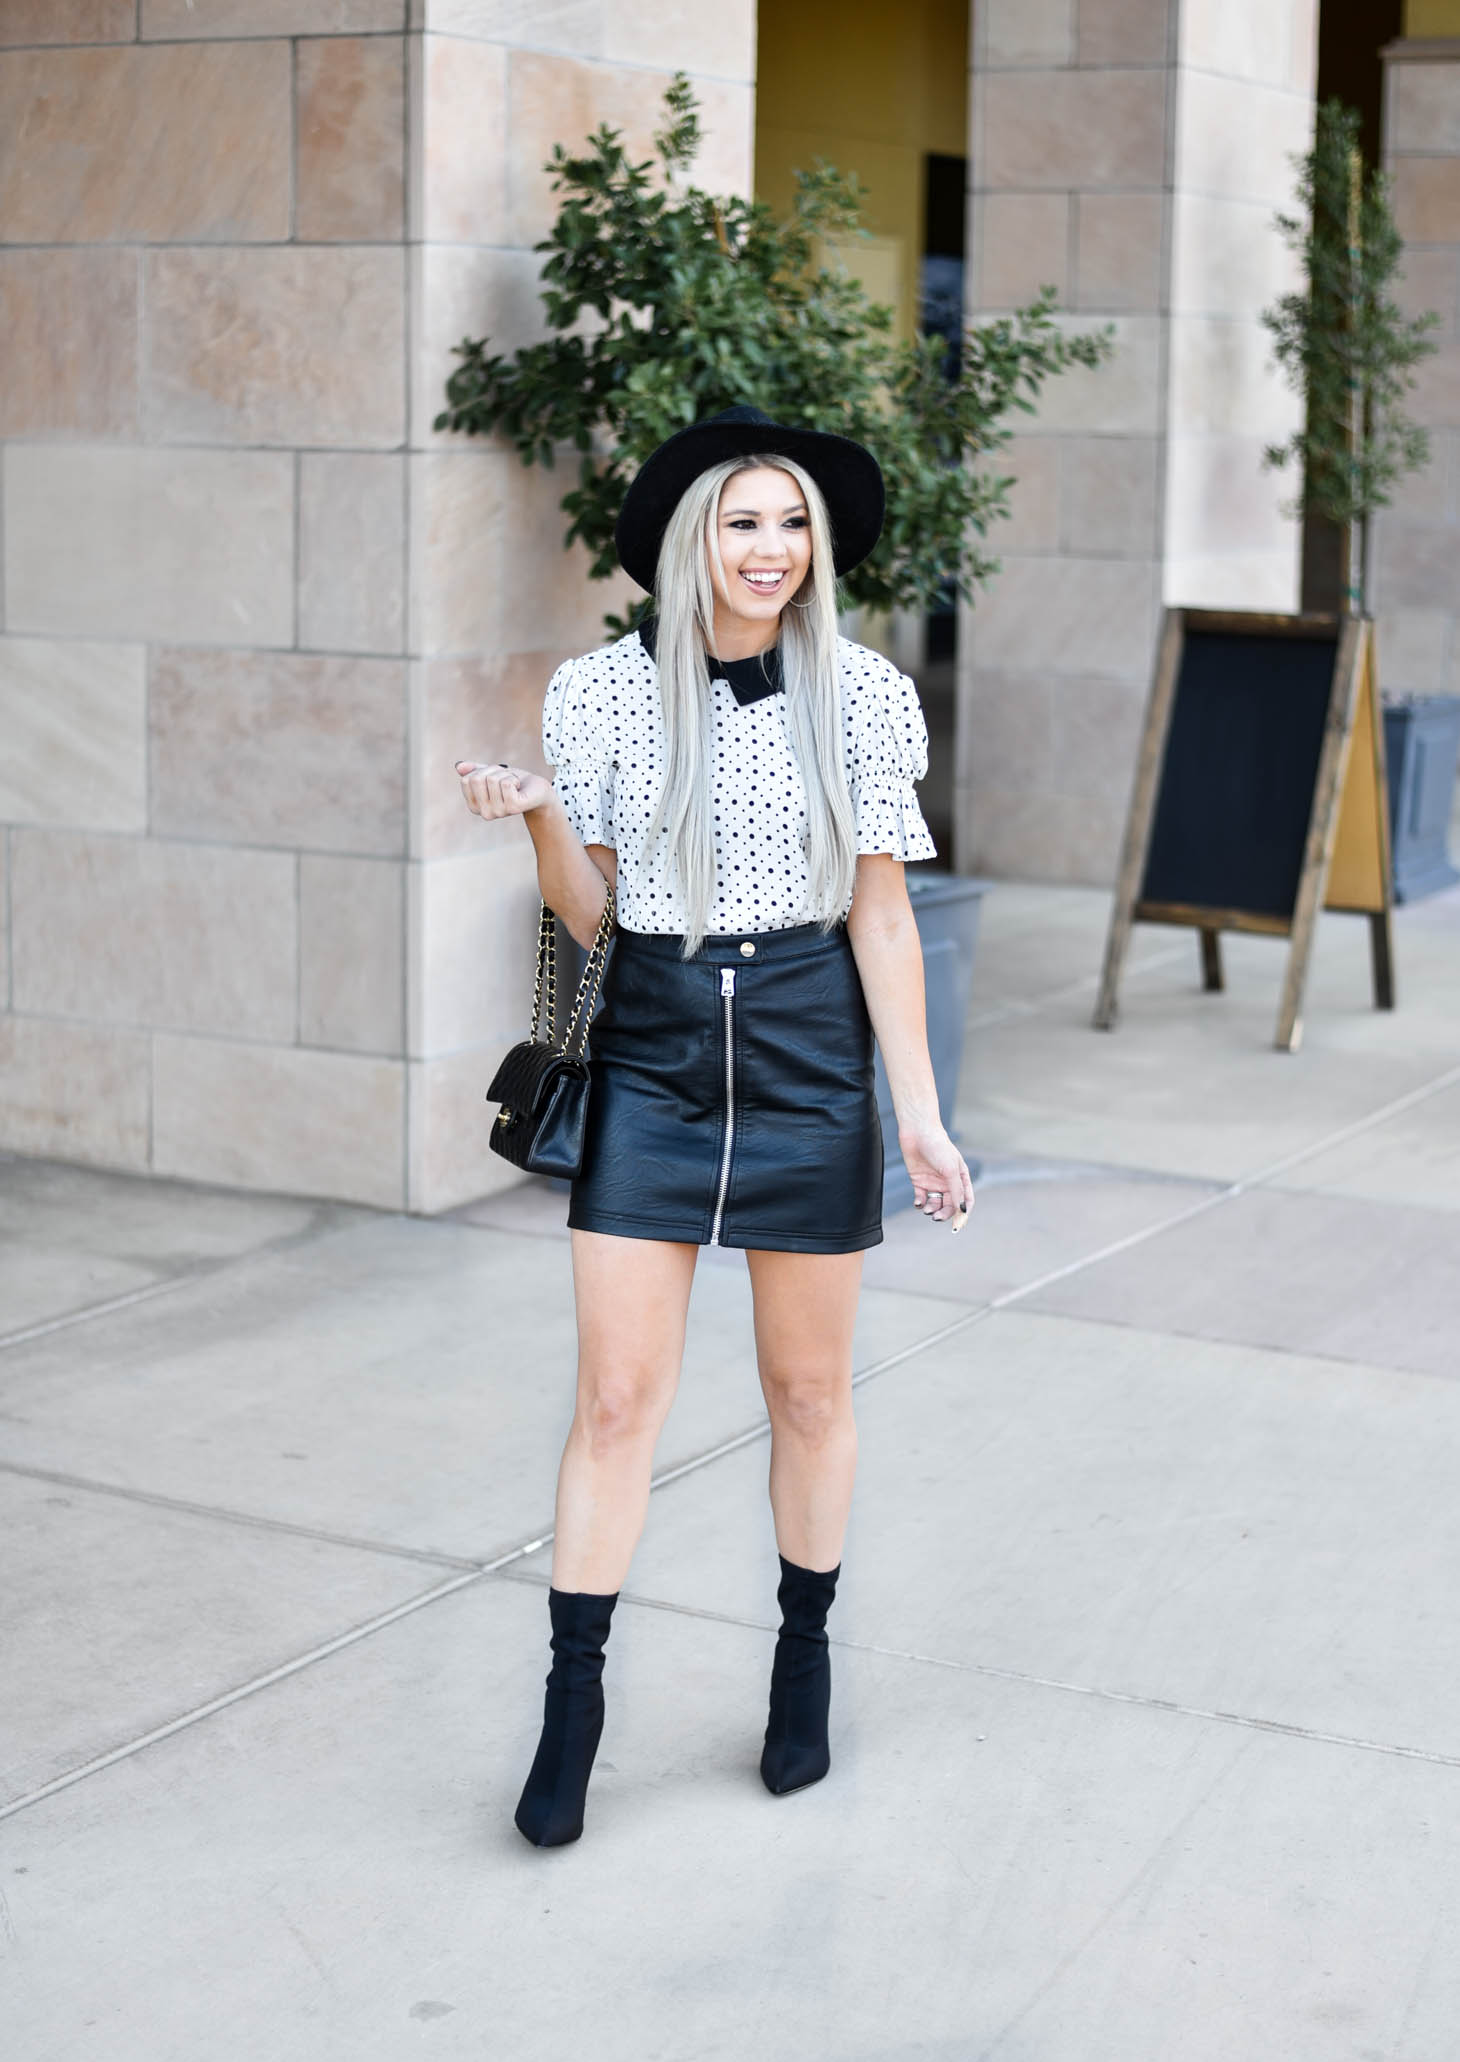 Erin Elizabeth of Wink and a Twirl shares the cutest CeCe Sportswear polka dot top and leather mini 